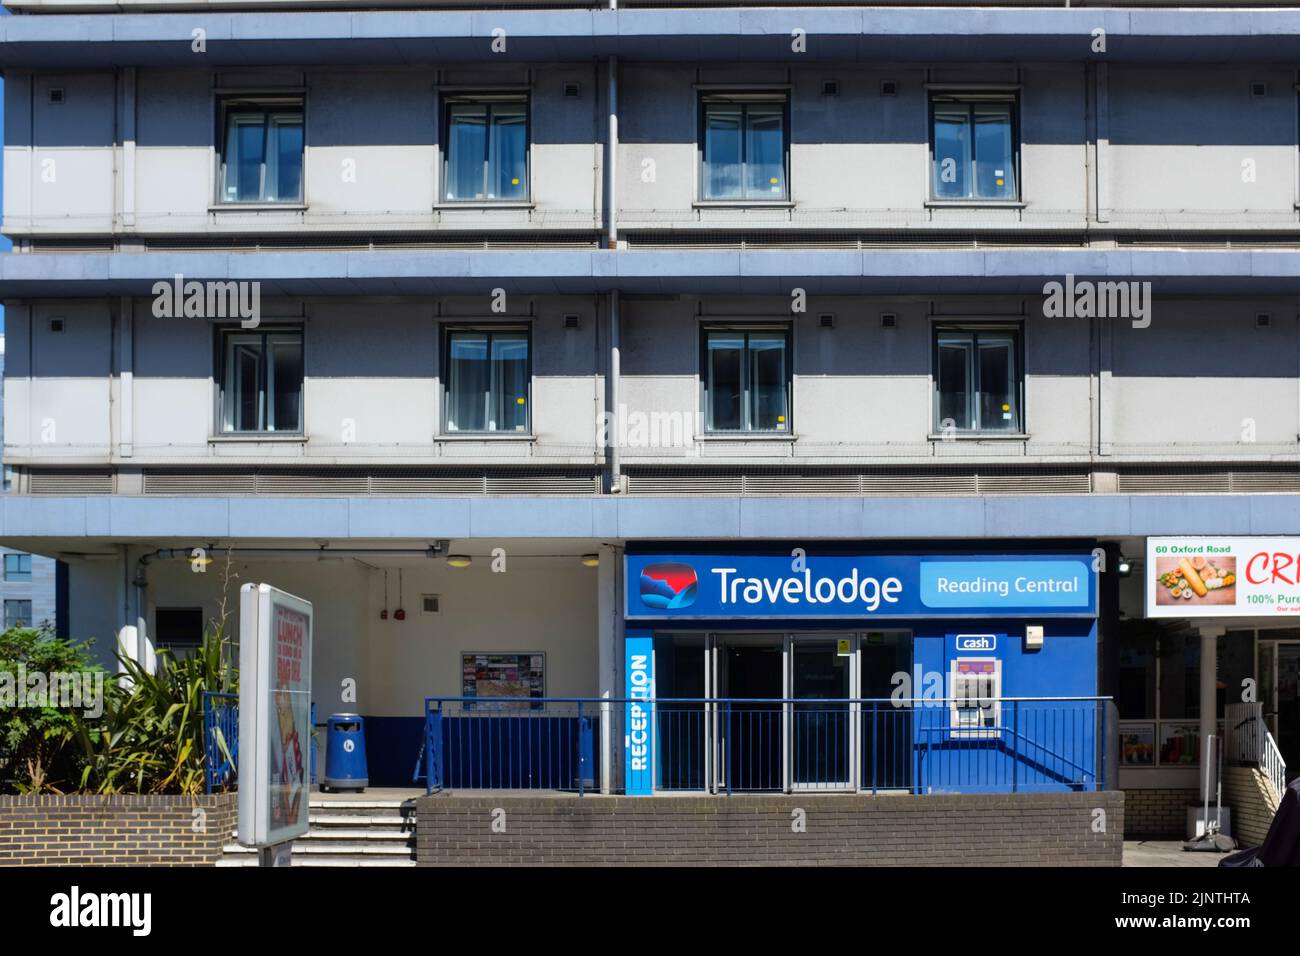 A Travelodge Hotel in Reading, Berkshire, England. Stock Photo